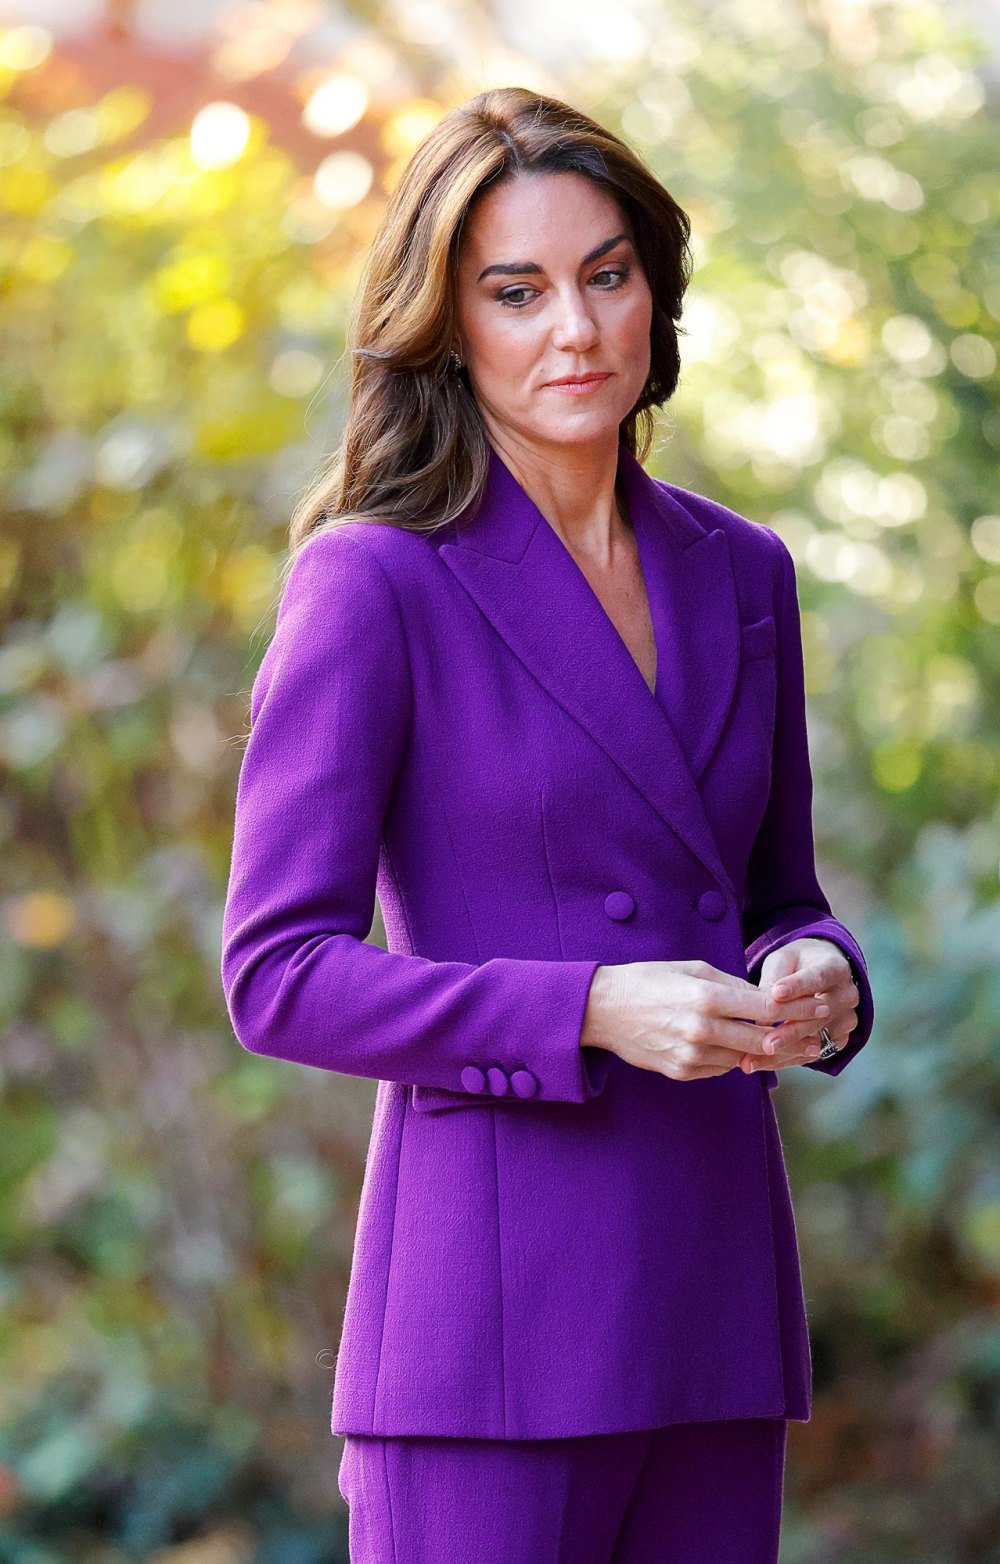 Kate Middleton s Medical Records Part of Security Breach at The London Clinic Report 246